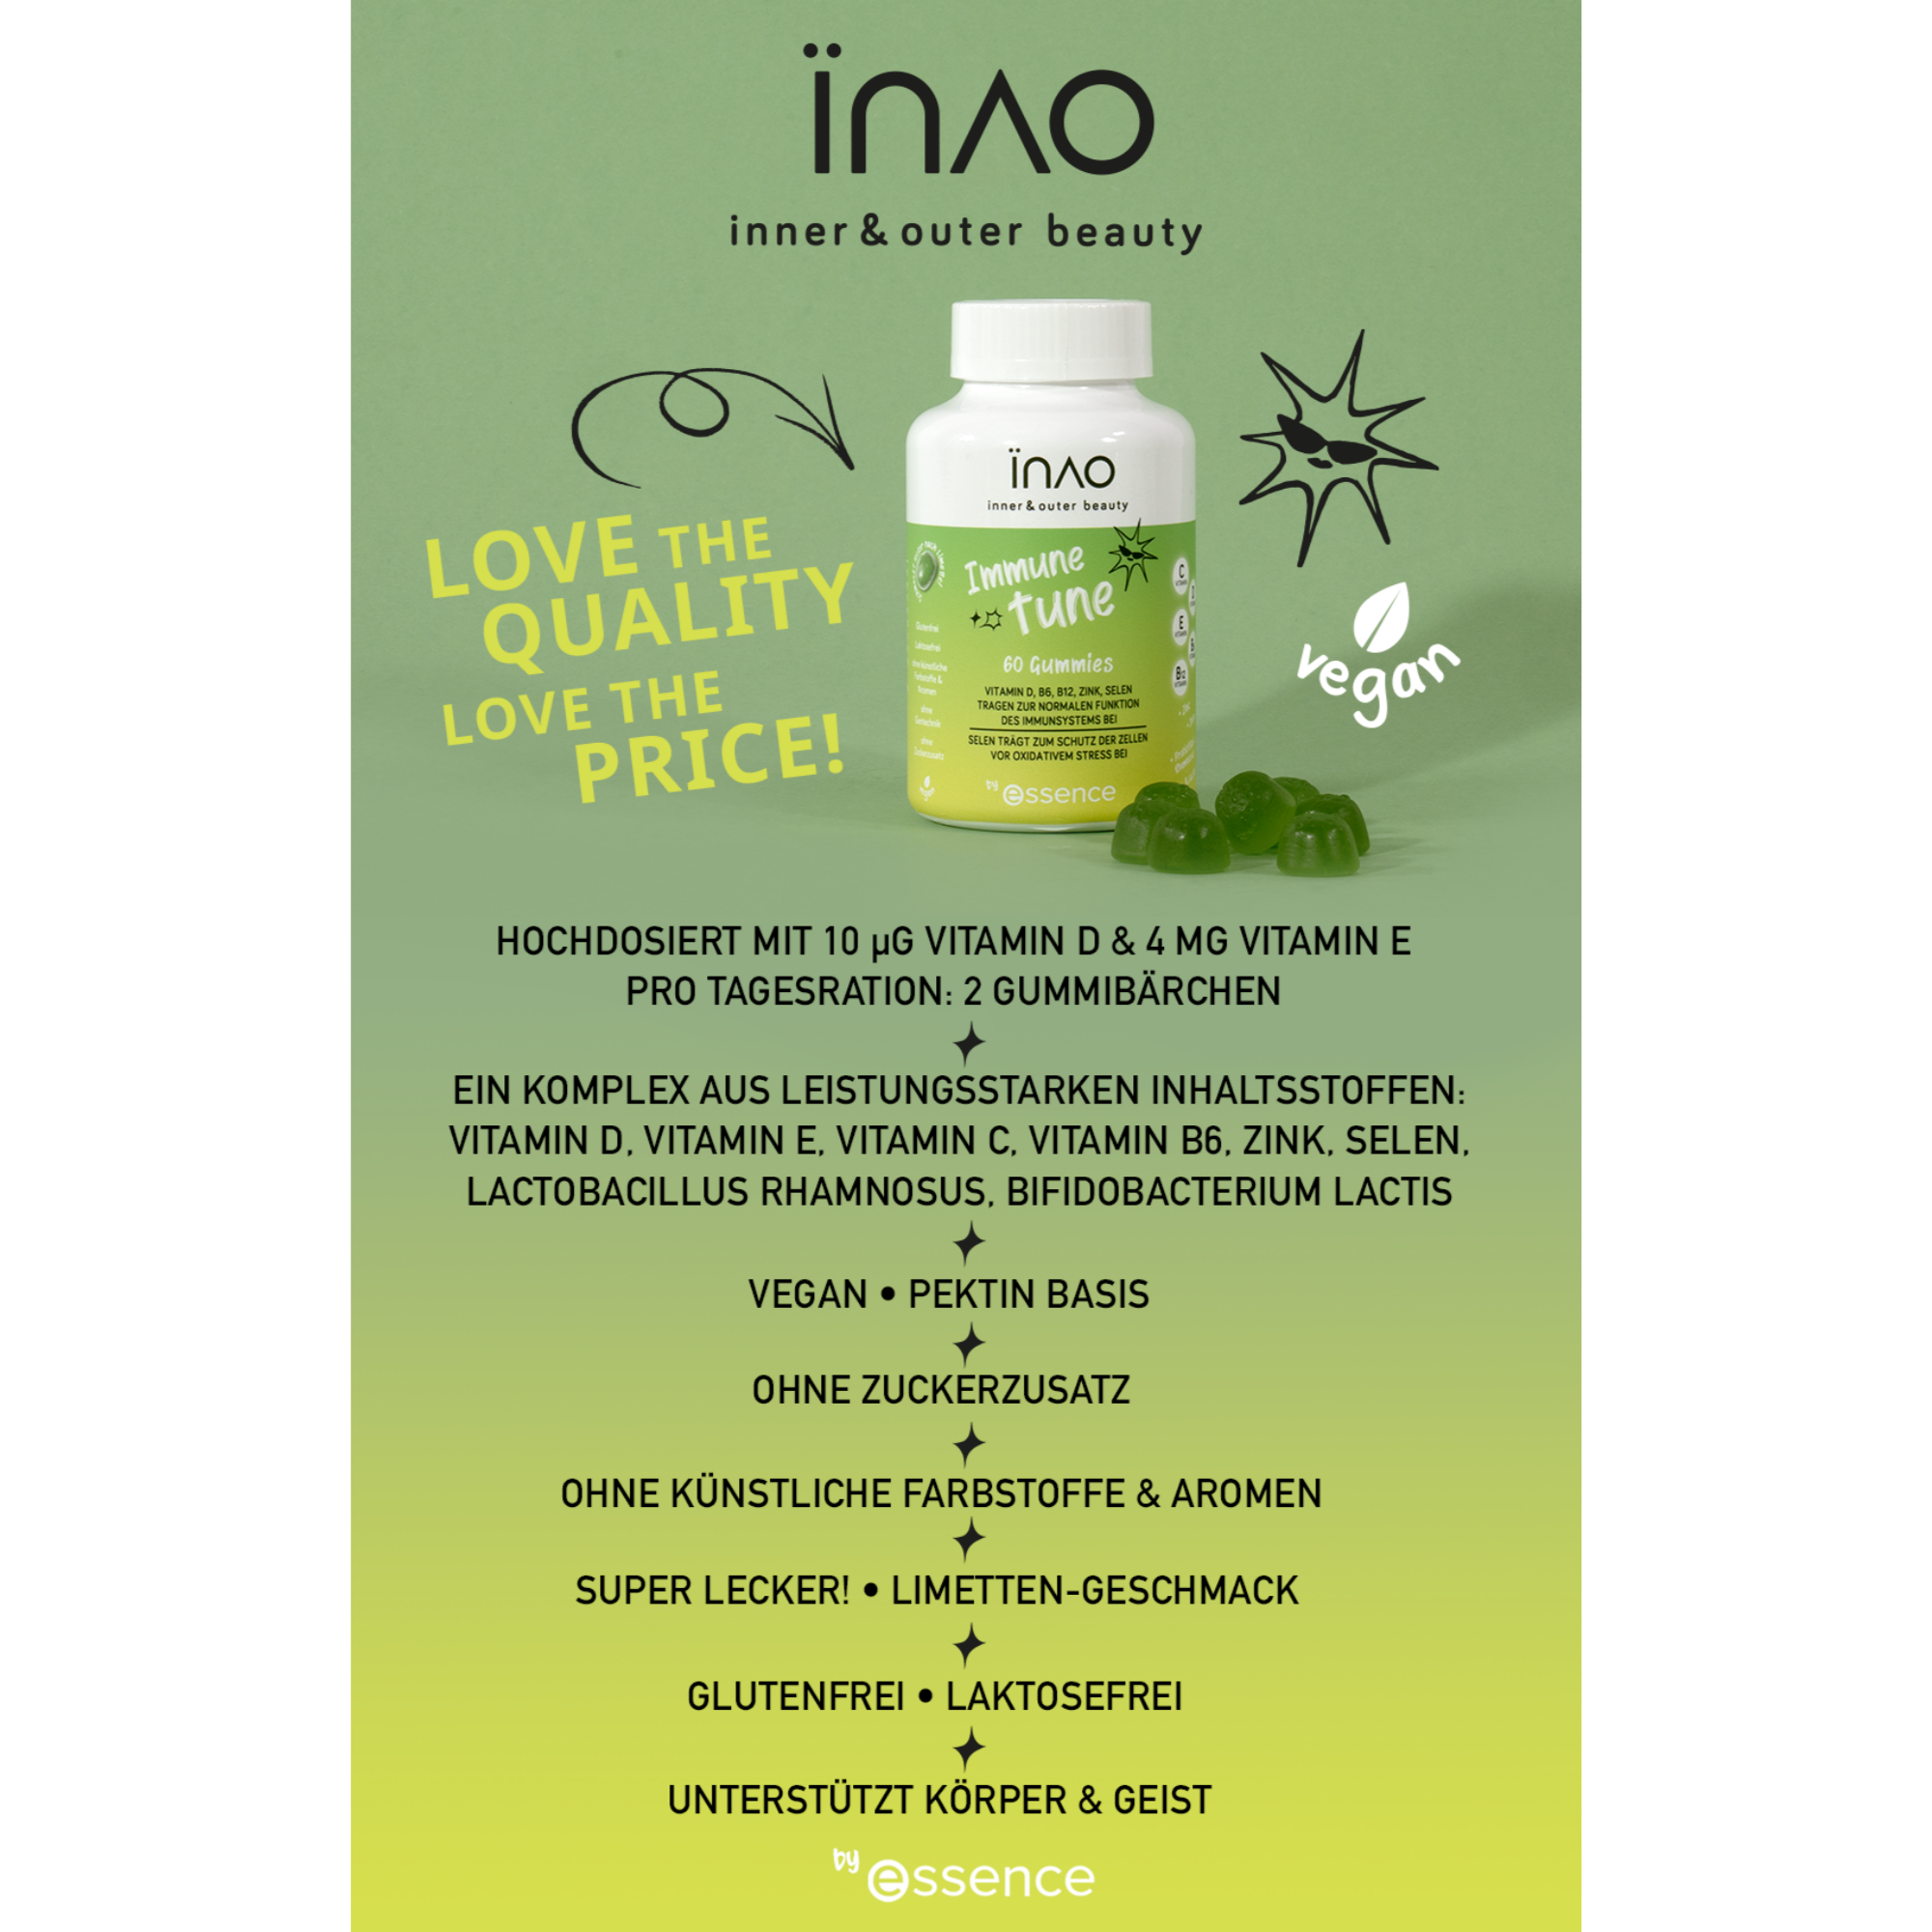 INAO inner and outer beauty Immune Tune viinikumit by essence